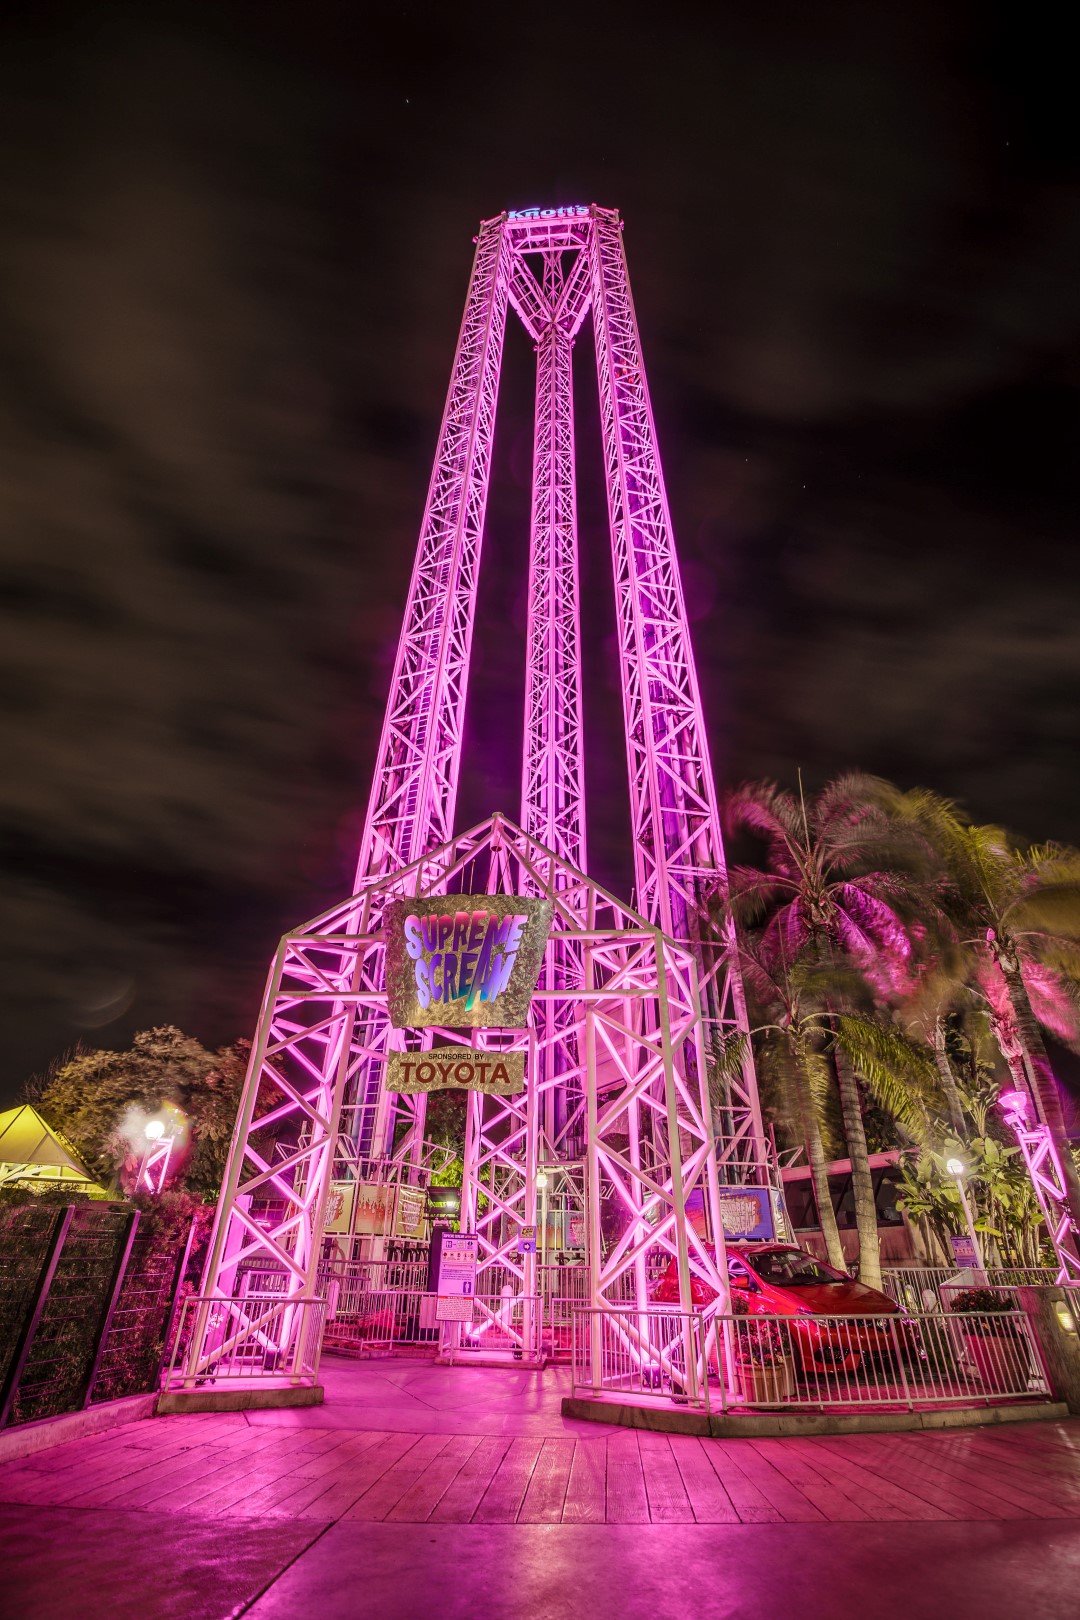 Knott's Supreme Scream Pink for a Cure_Verticle Shot (Large)